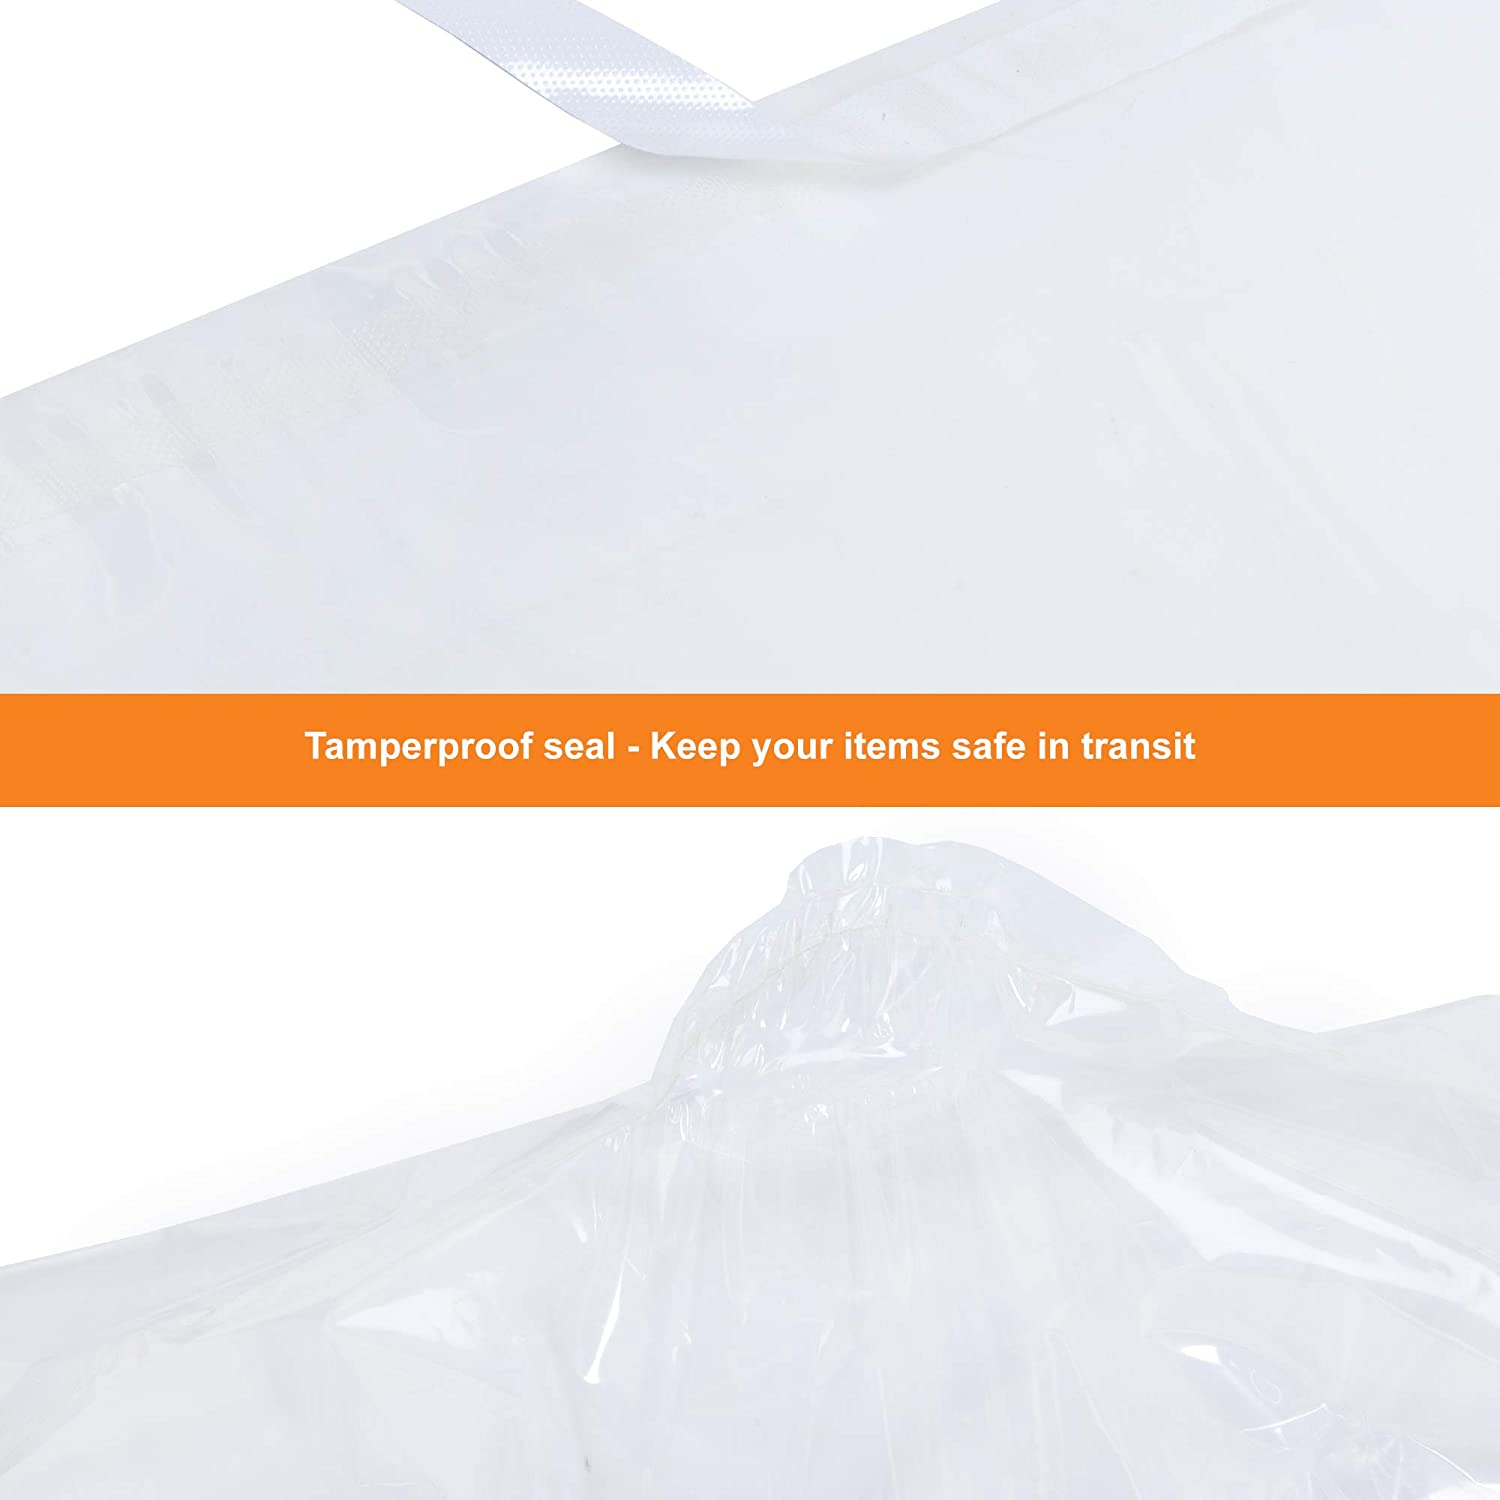 14 x 20 industrial clear poly bags with temperproof seal